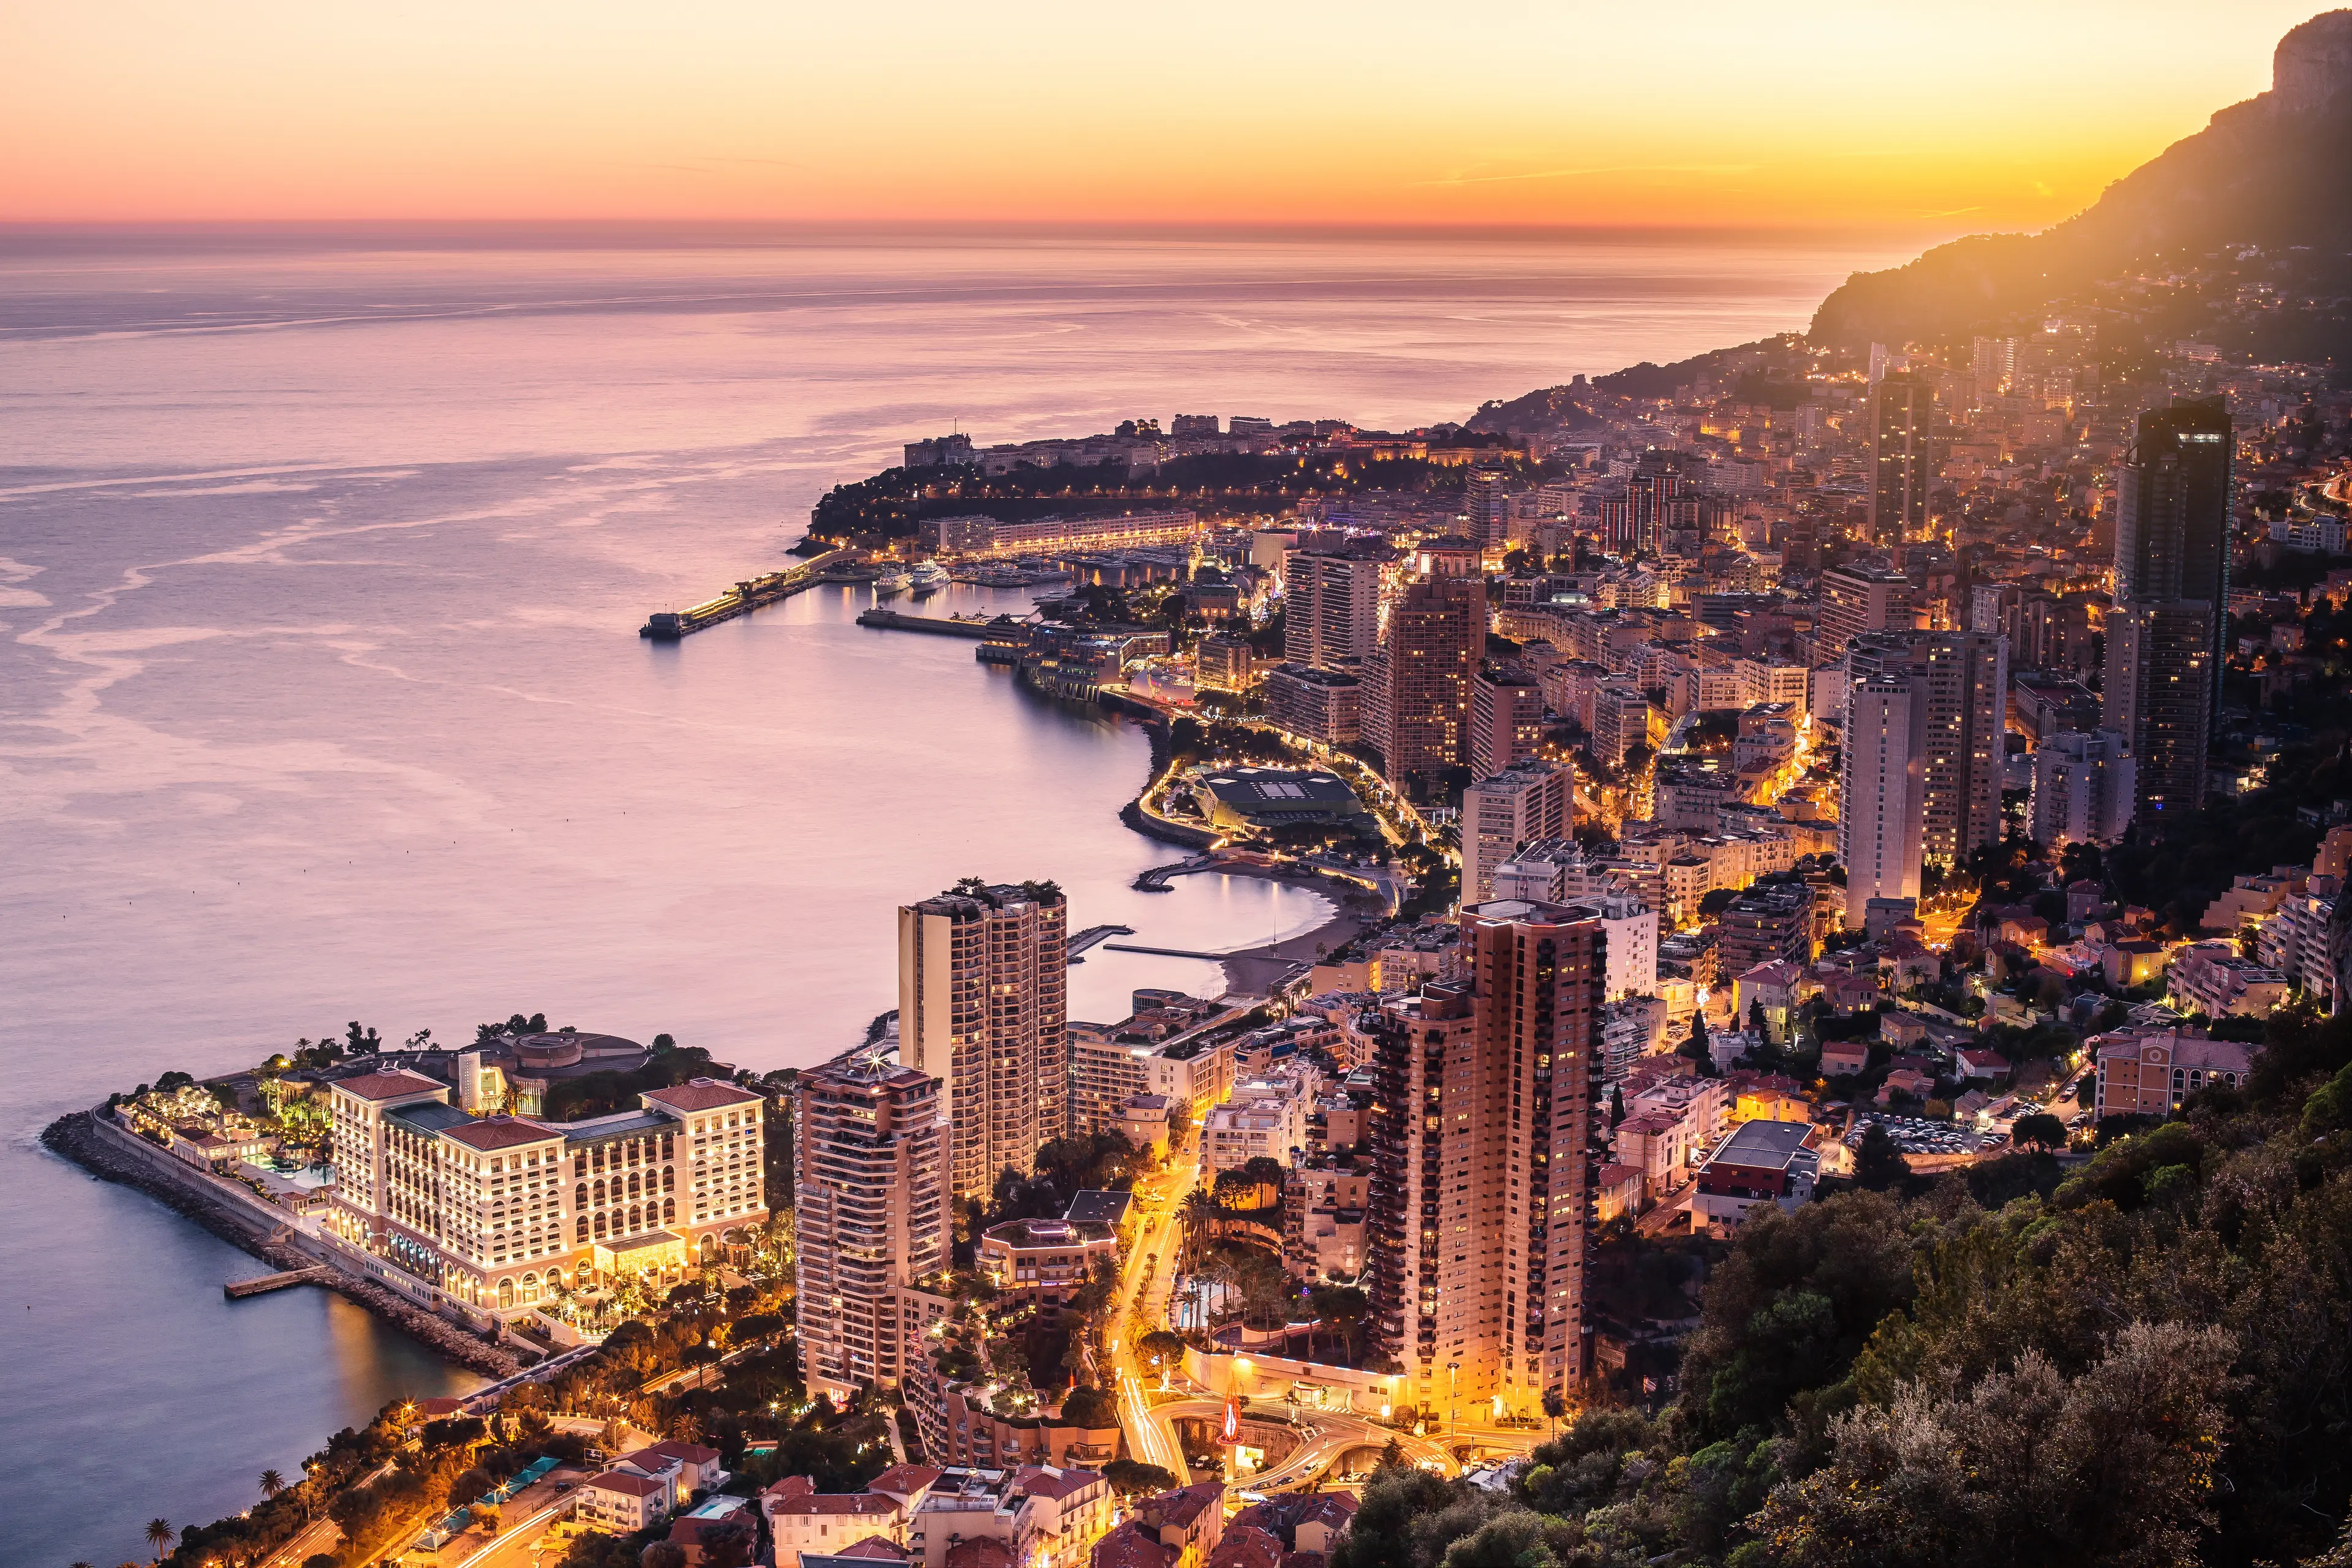 5-Day Exciting Journey Through the Stunning French Riviera